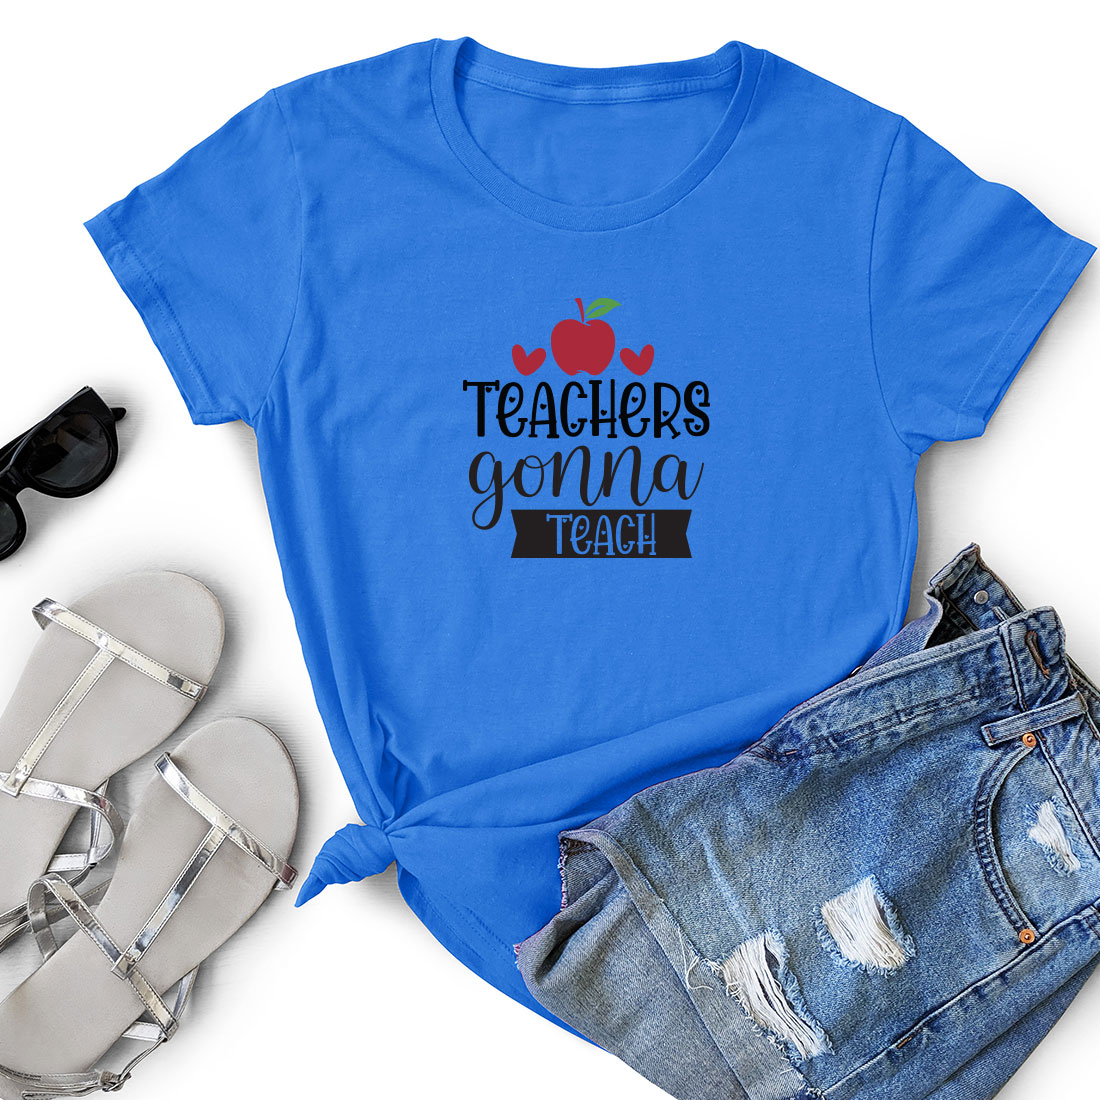 T - shirt that says teachers are going to teach.